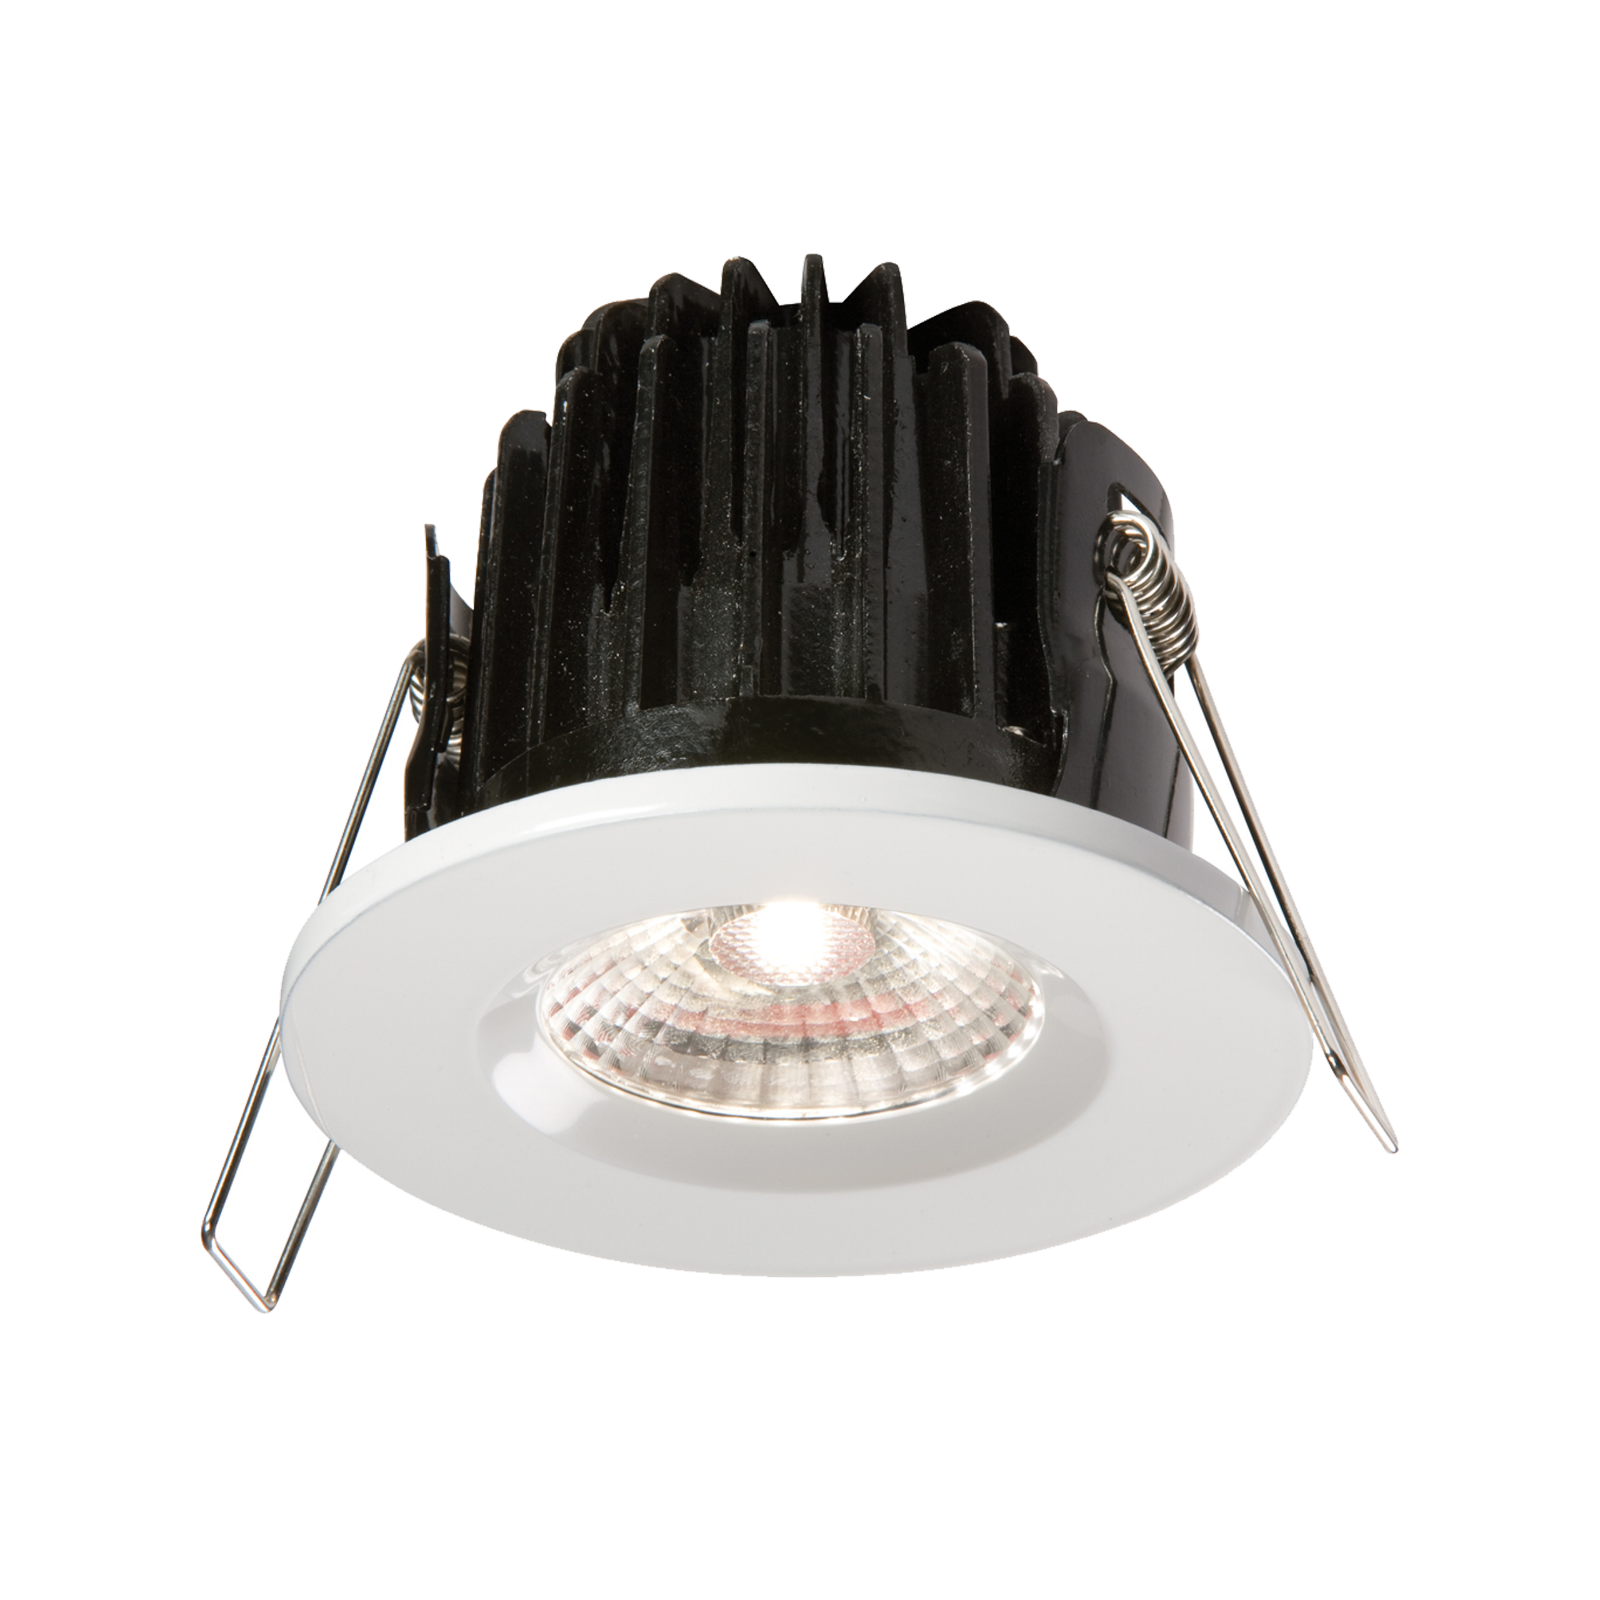 IP65 7W LED 4000K Cool White Downlight With White Bezel - VFRCOBCW 